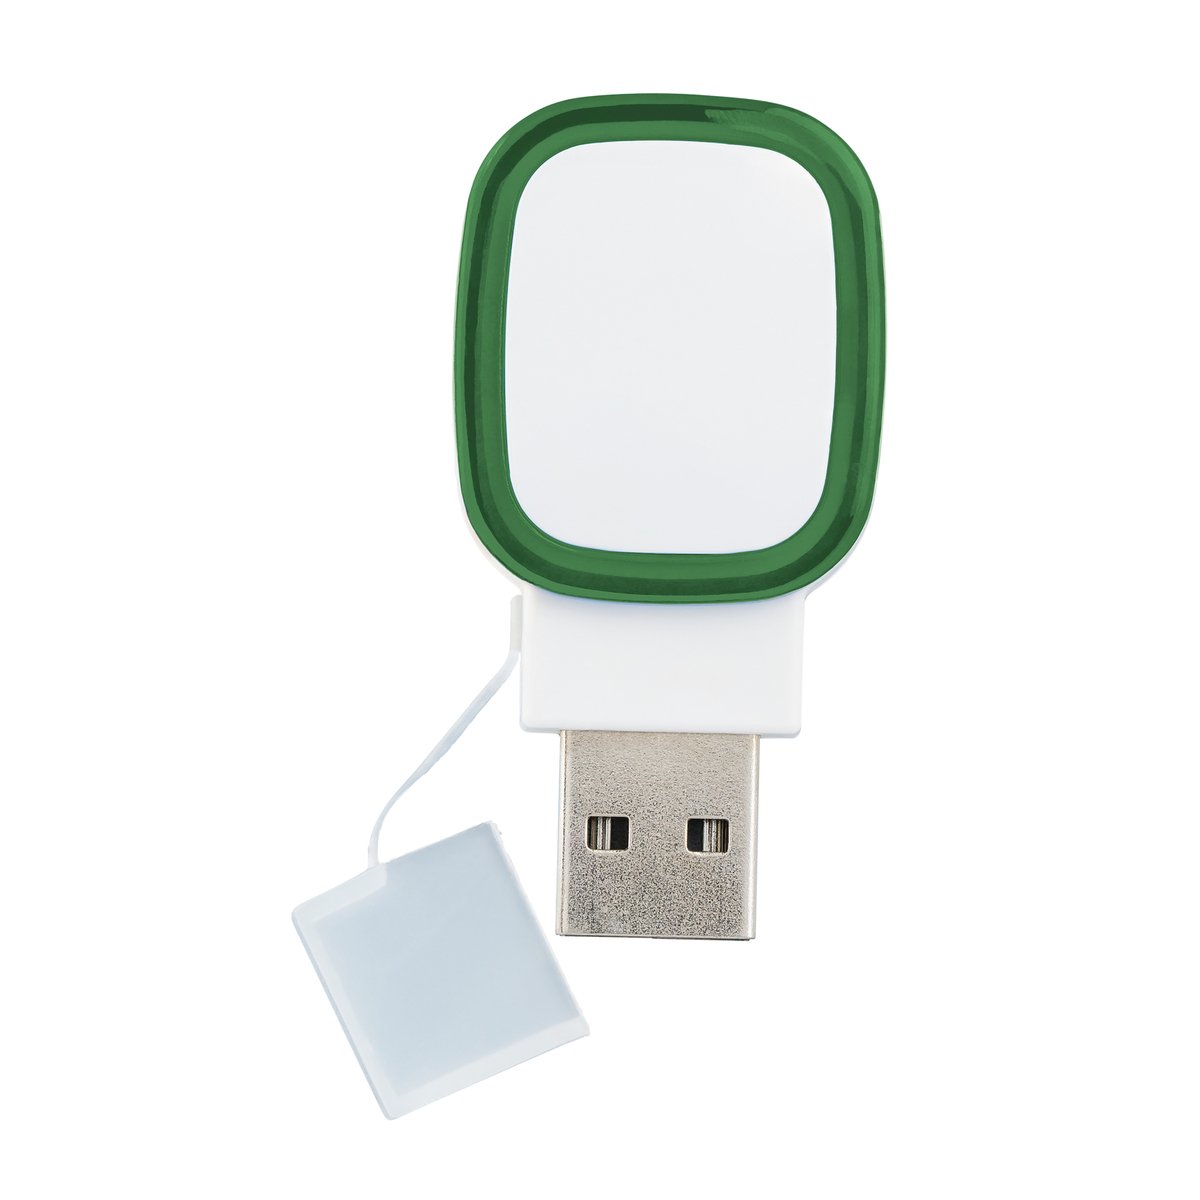 USB flash drive COLLECTION 500 green 8GB